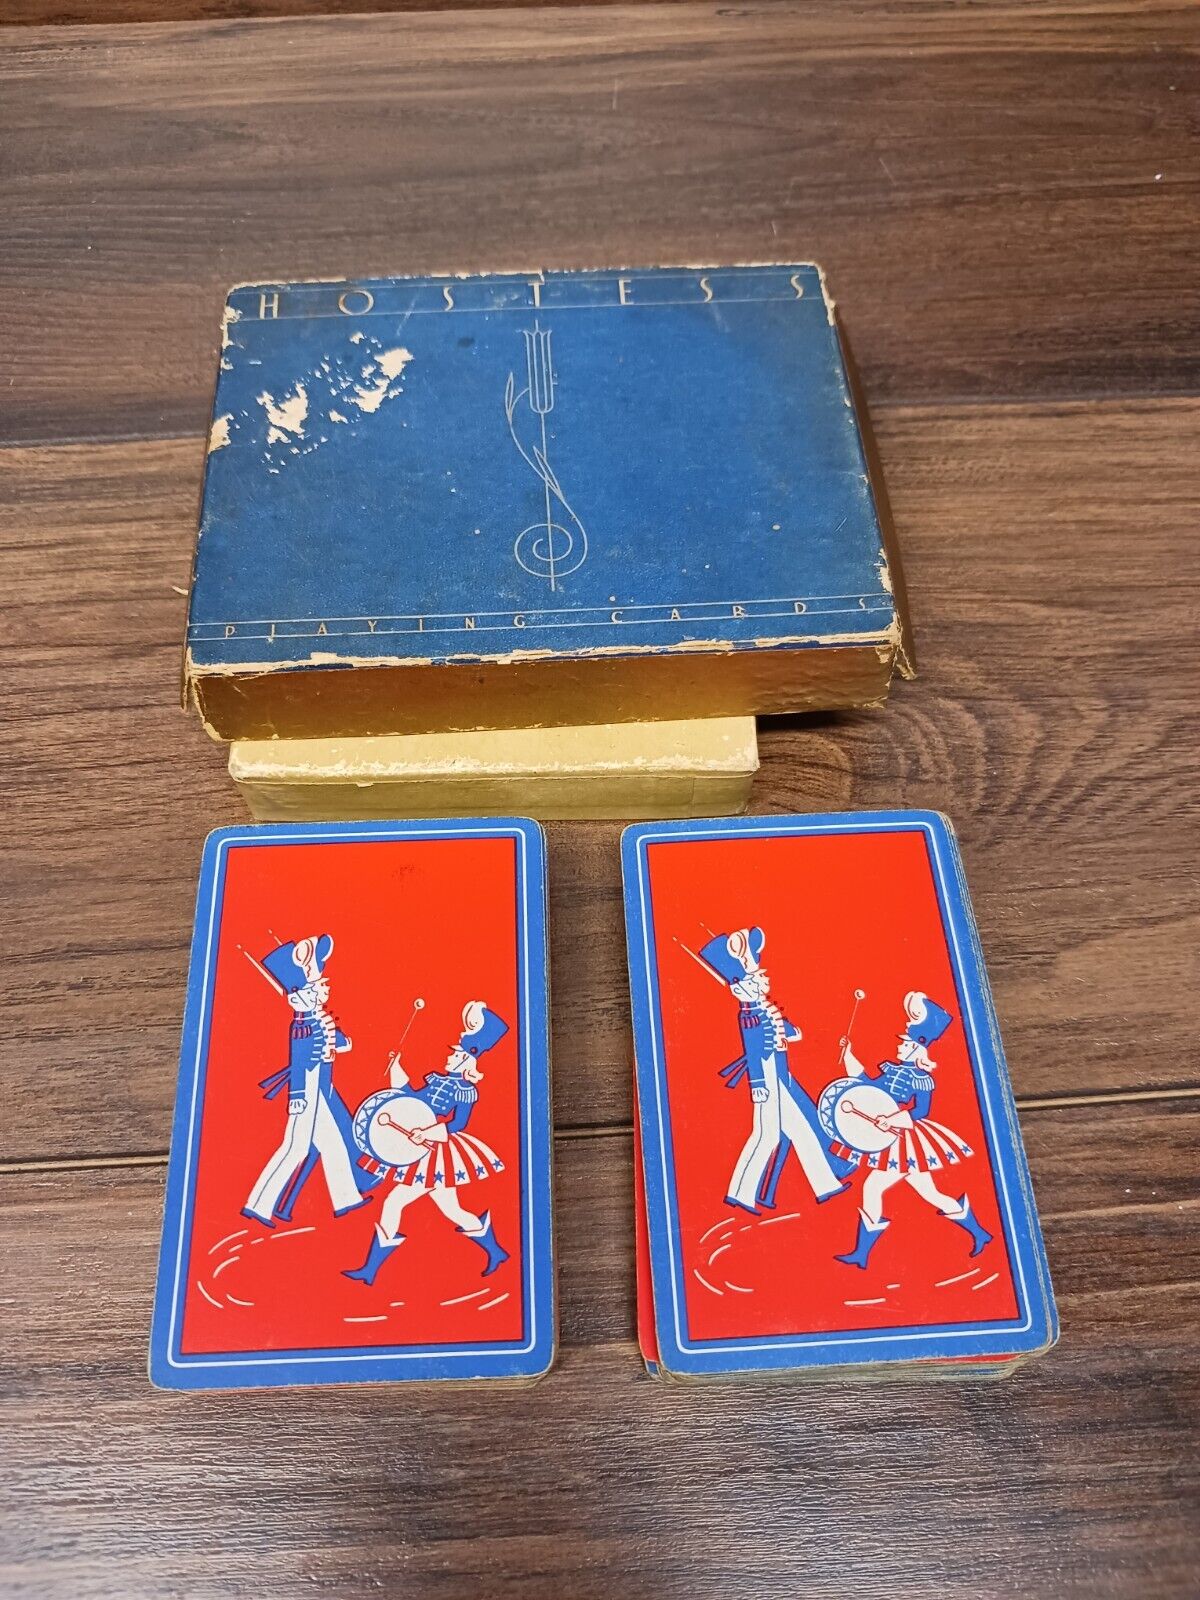 Vintage HOSTESS TWO DECK PLAYING CARDS in Original Box